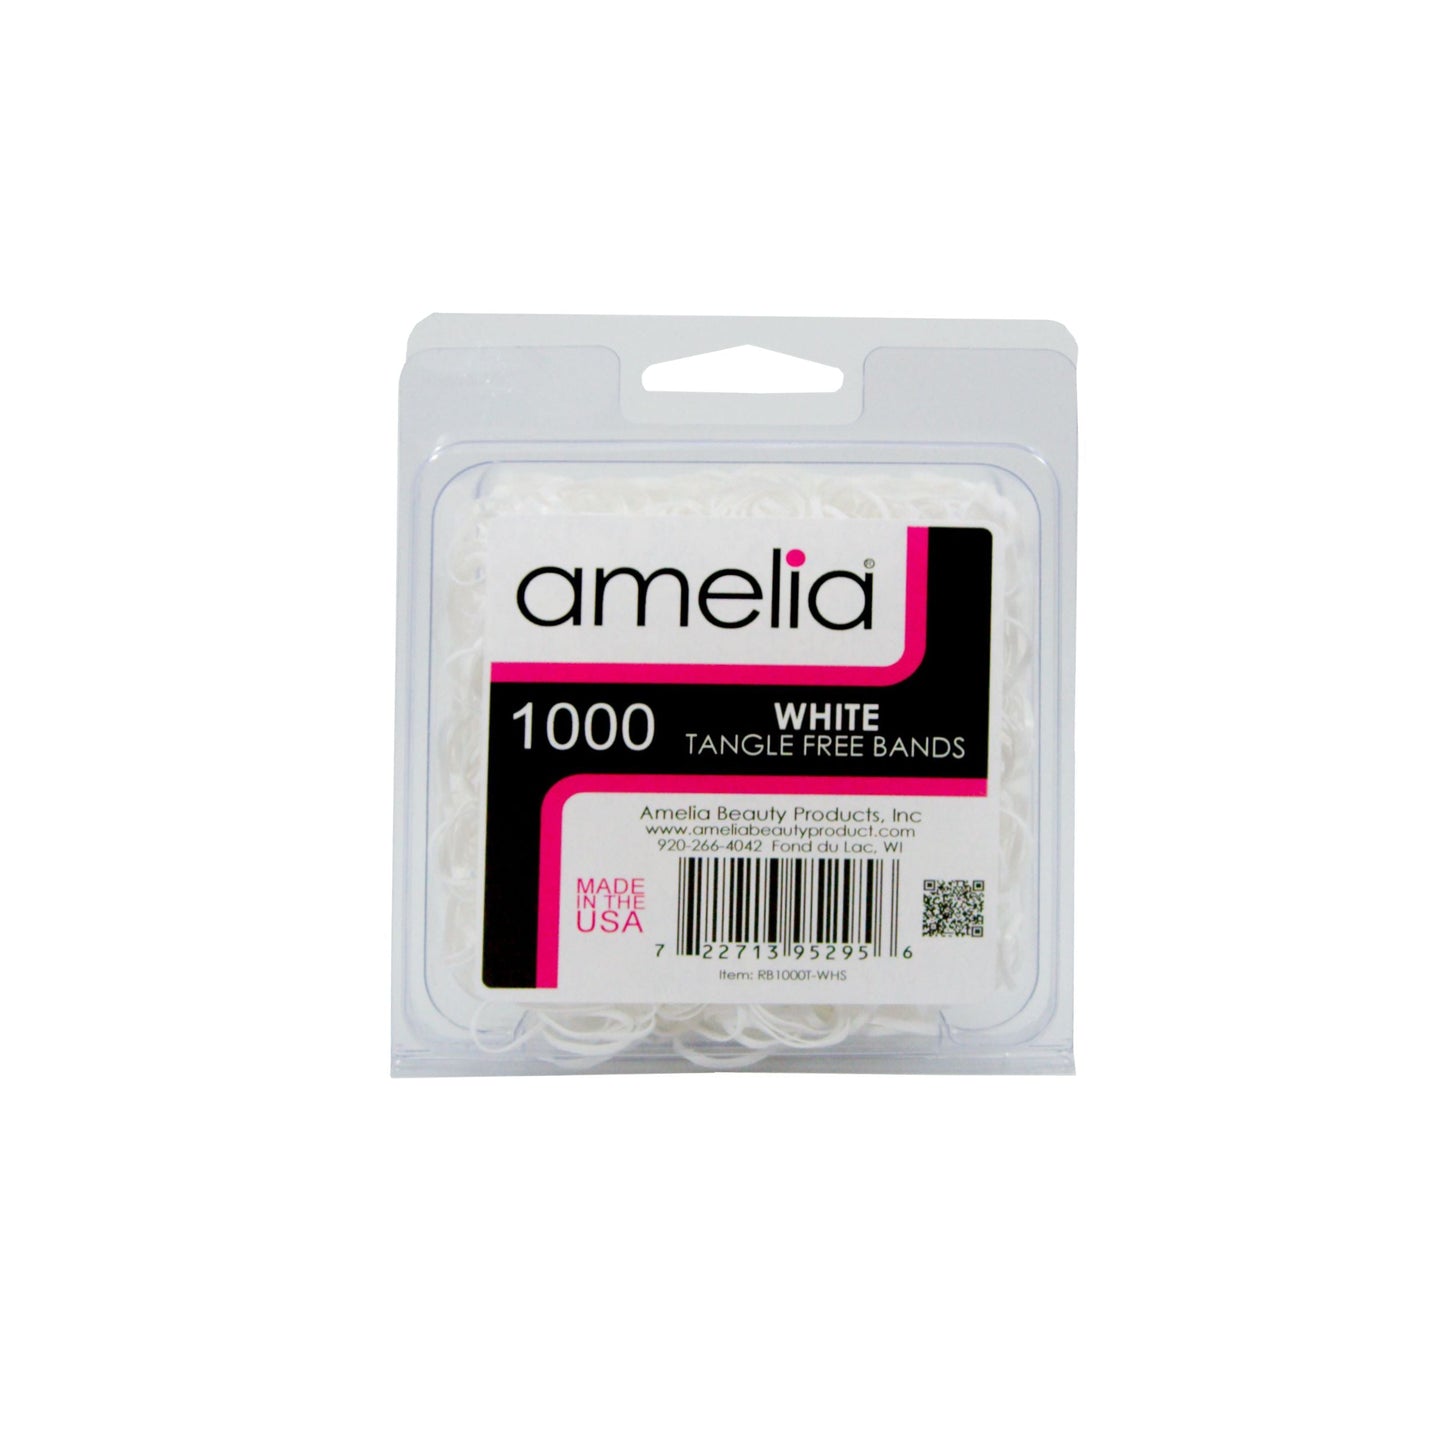 Amelia Beauty | 1/2in, White, Tangle Free Elastic Pony Tail Holders | Made in USA, Ideal for Ponytails, Braids, Twists. For Women, Girls. Pain Free, Snag Free, Easy Off | 1000 Pack - 12 Retail Packs